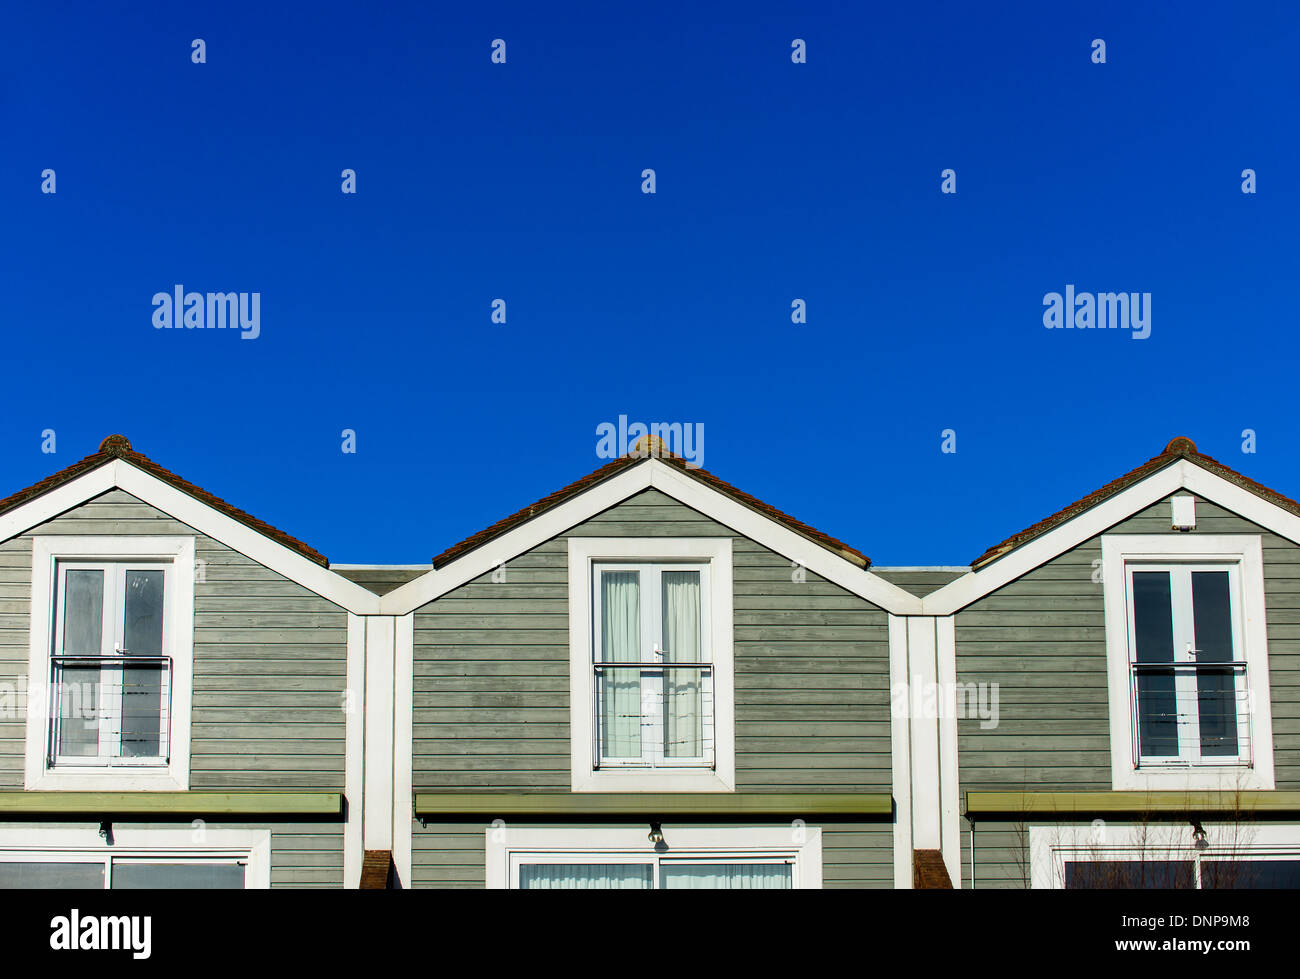 Pattern formed by the roofs of three terraced houses, with blue sky, in Bosham, West Sussex, England. Stock Photo